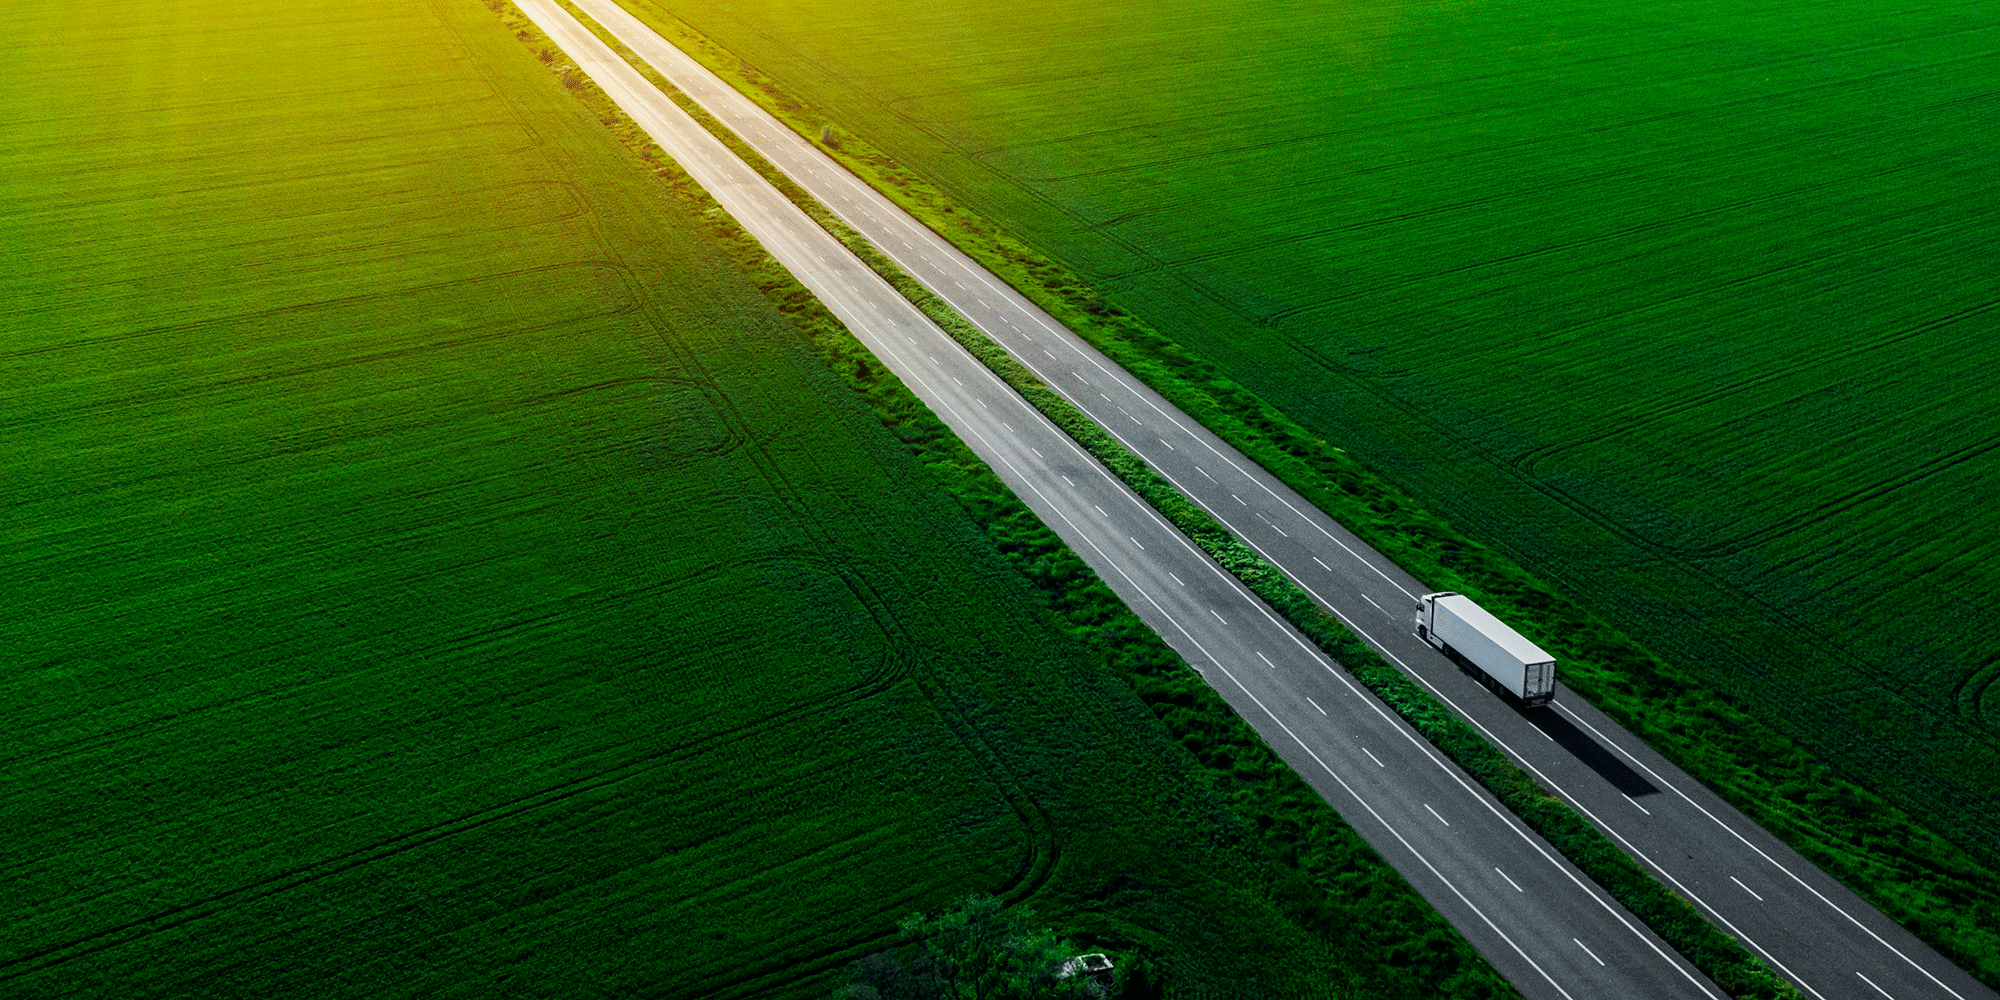 Lorry driving on a road in between green fields